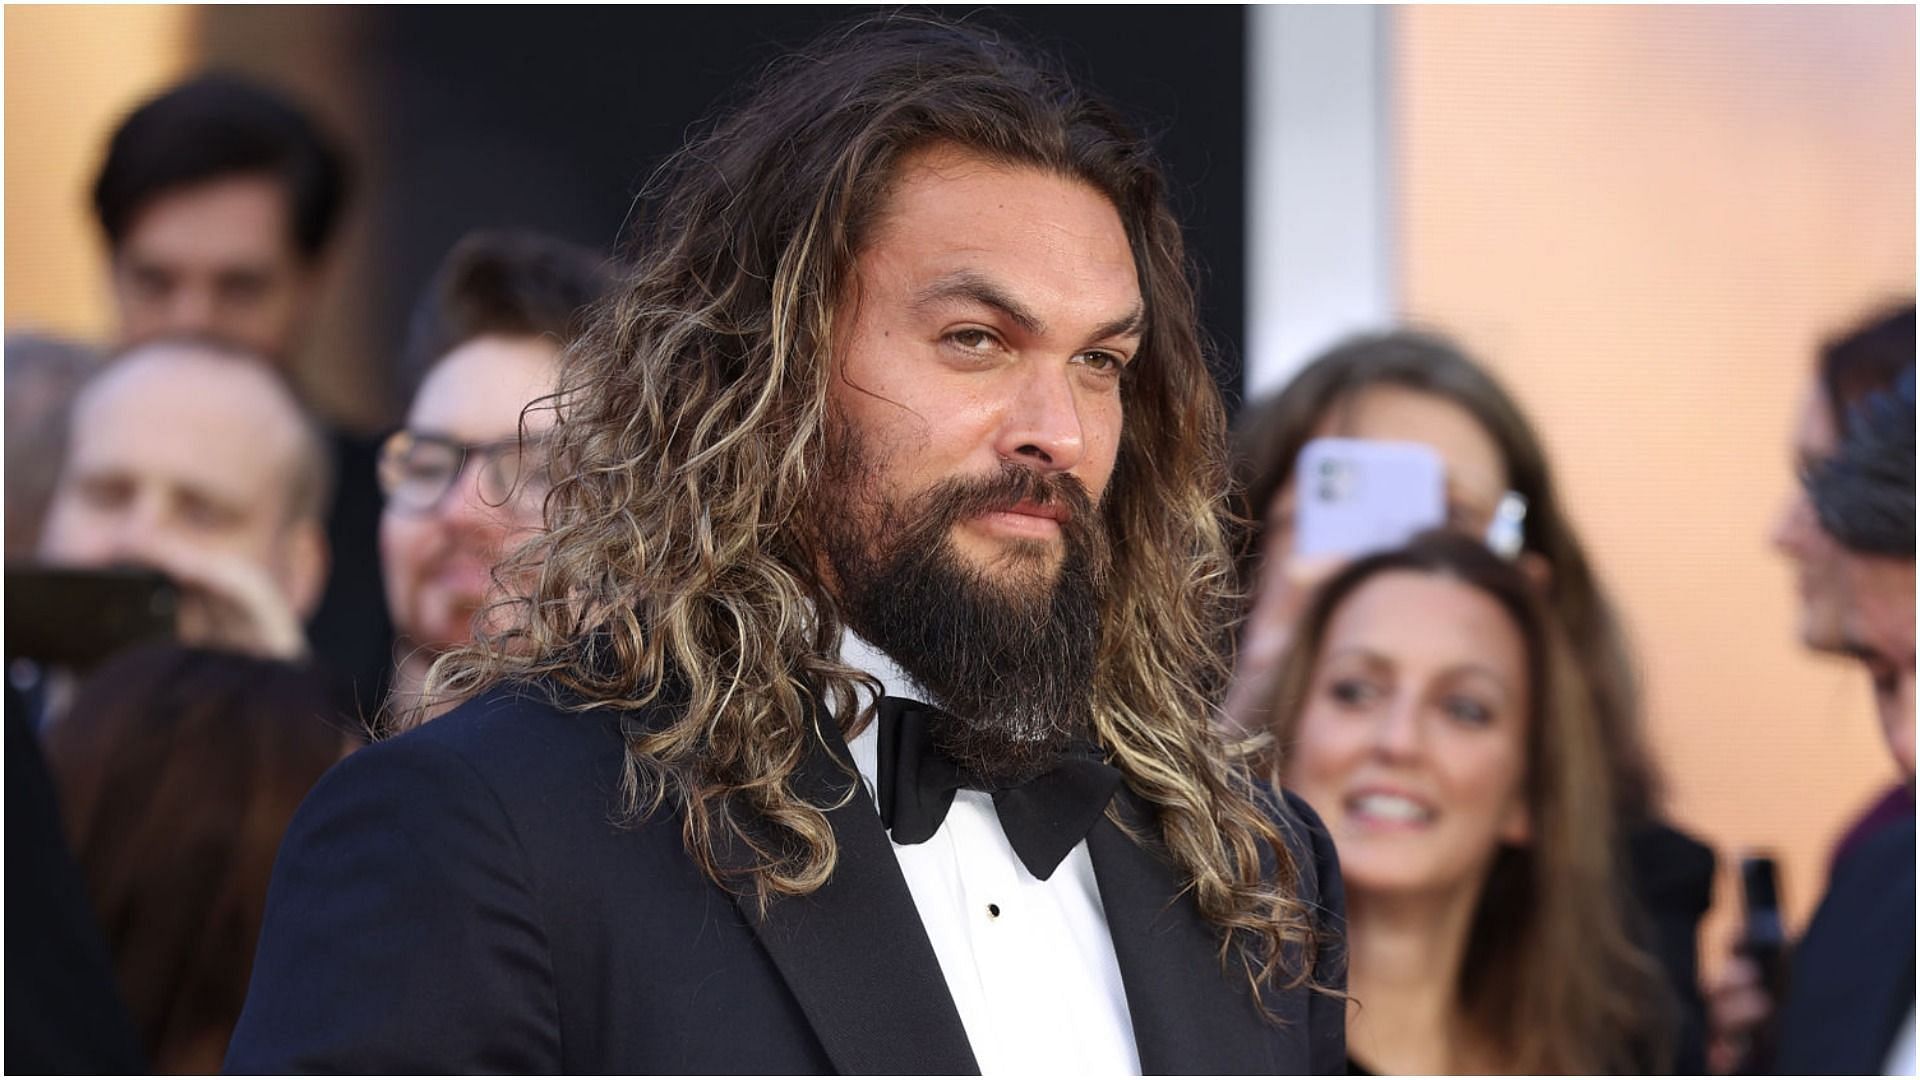 Jason Momoa attends the &quot;No Time To Die&quot; World Premiere at Royal Albert Hall (Image via Mark Marsland/Getty Images)